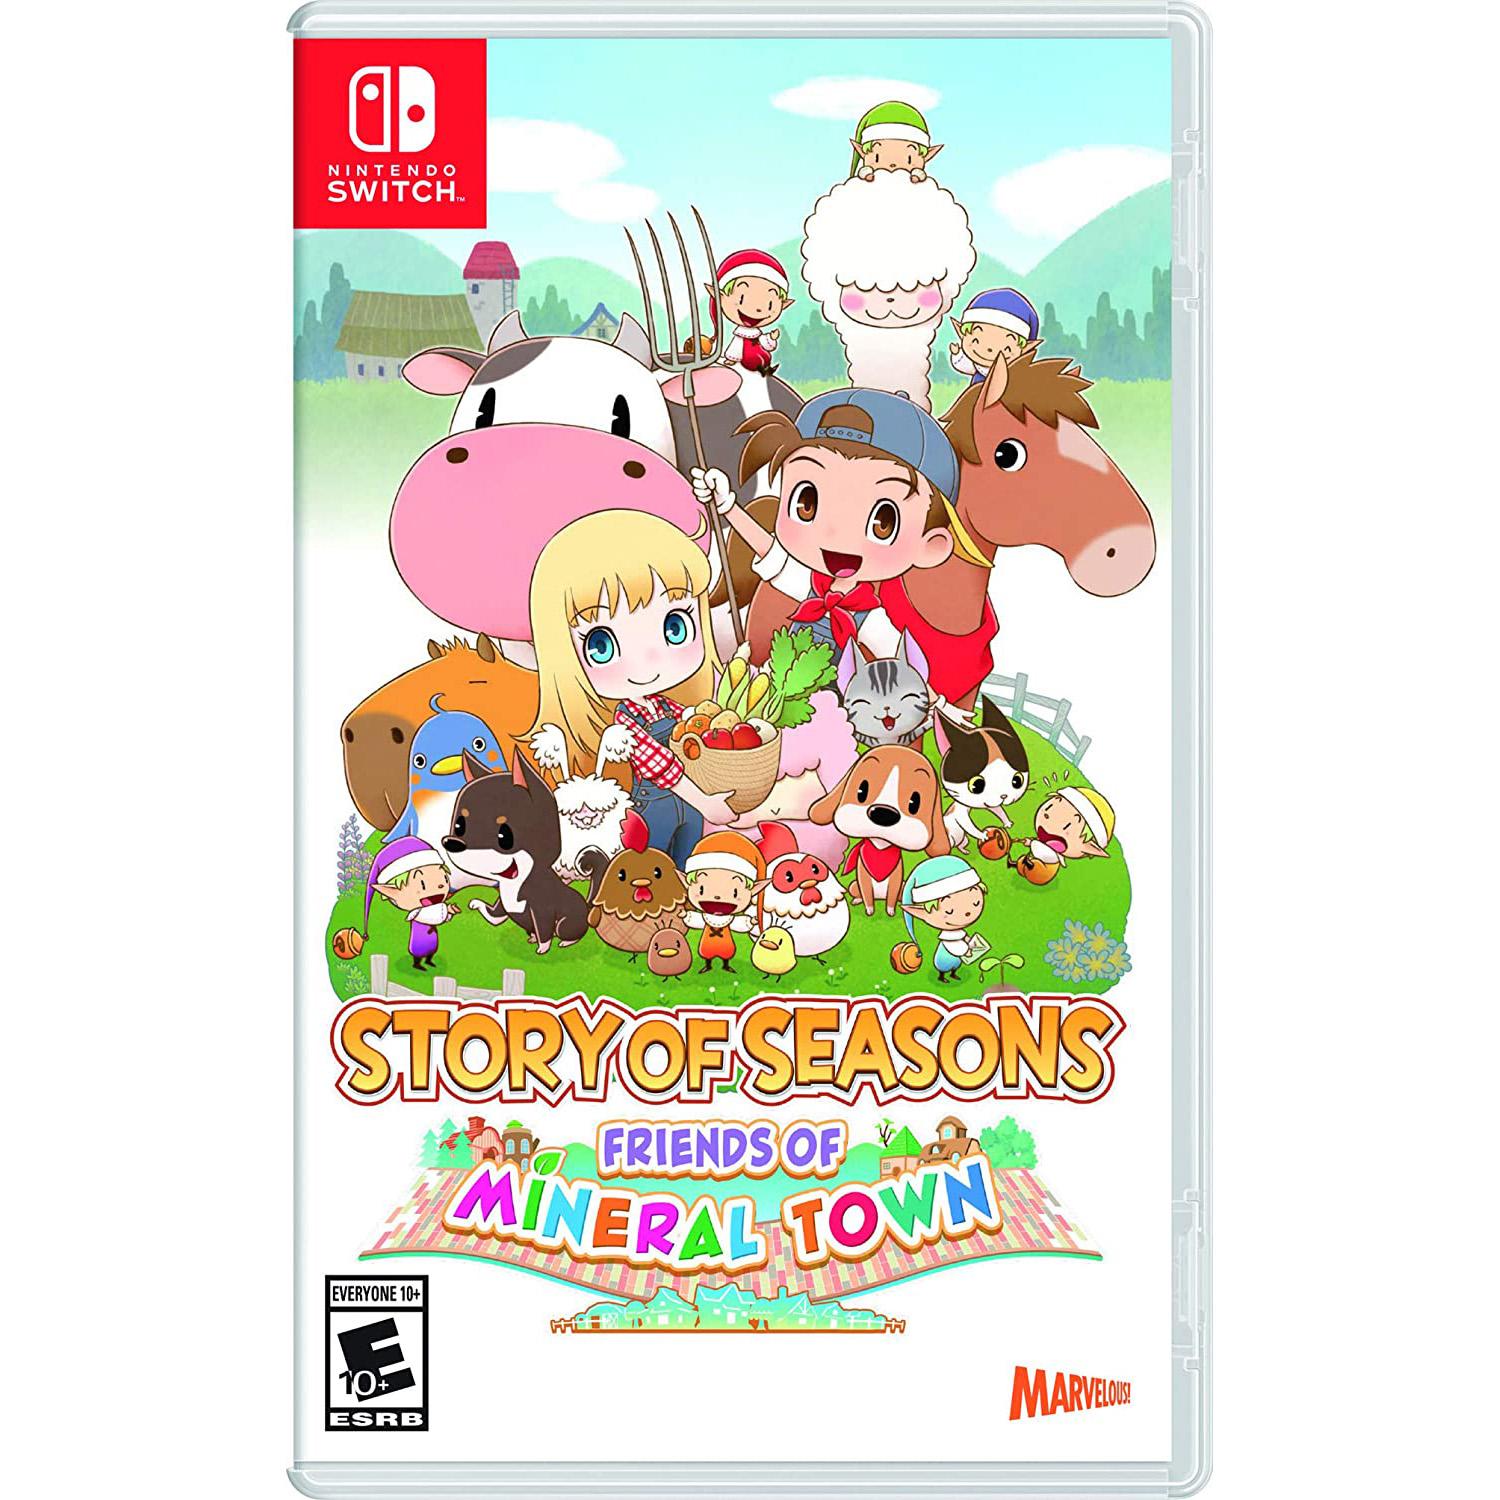 Story of Seasons: Friends of Mineral Town Nintendo Switch for $19.99